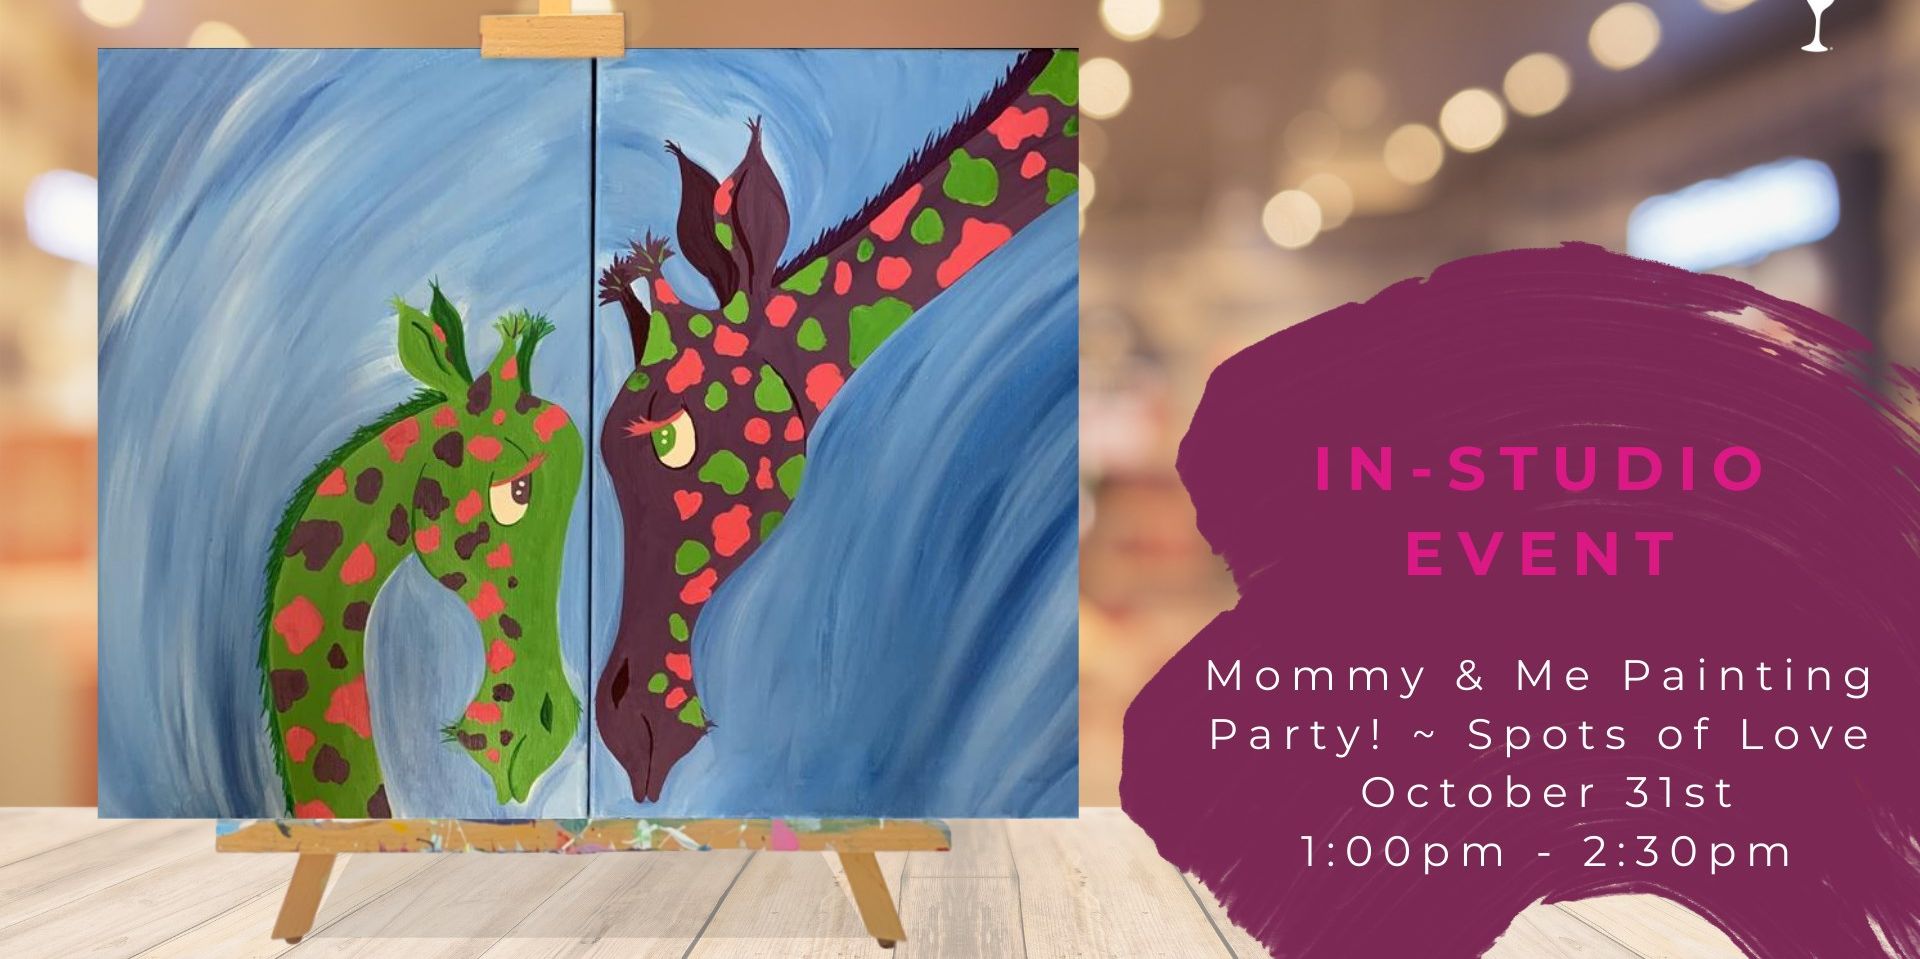 Mommy & Me Painting Party! ~ Spots of Love promotional image